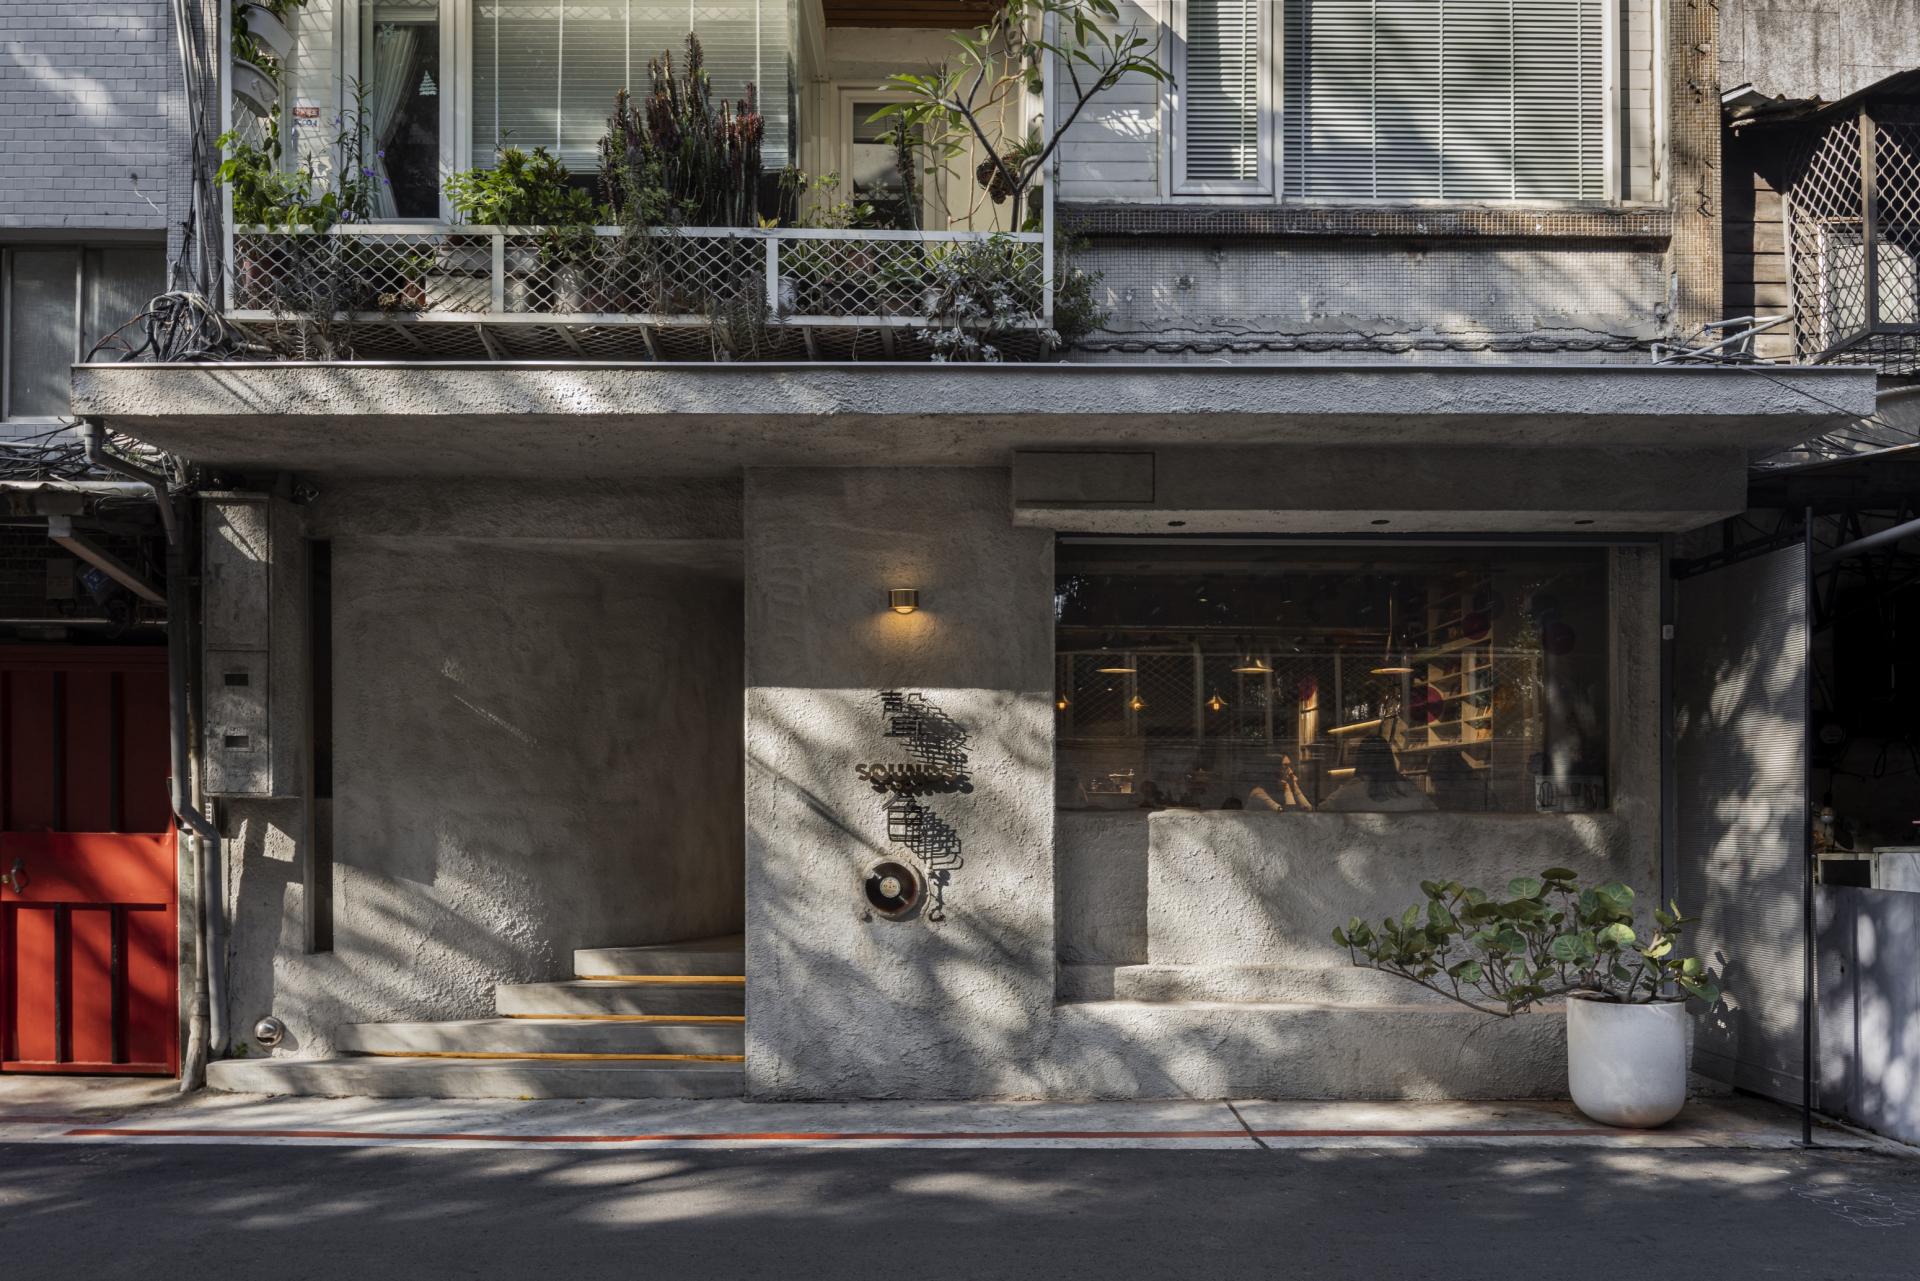 This Tapei coffee shop has the story of music woven into its interiors